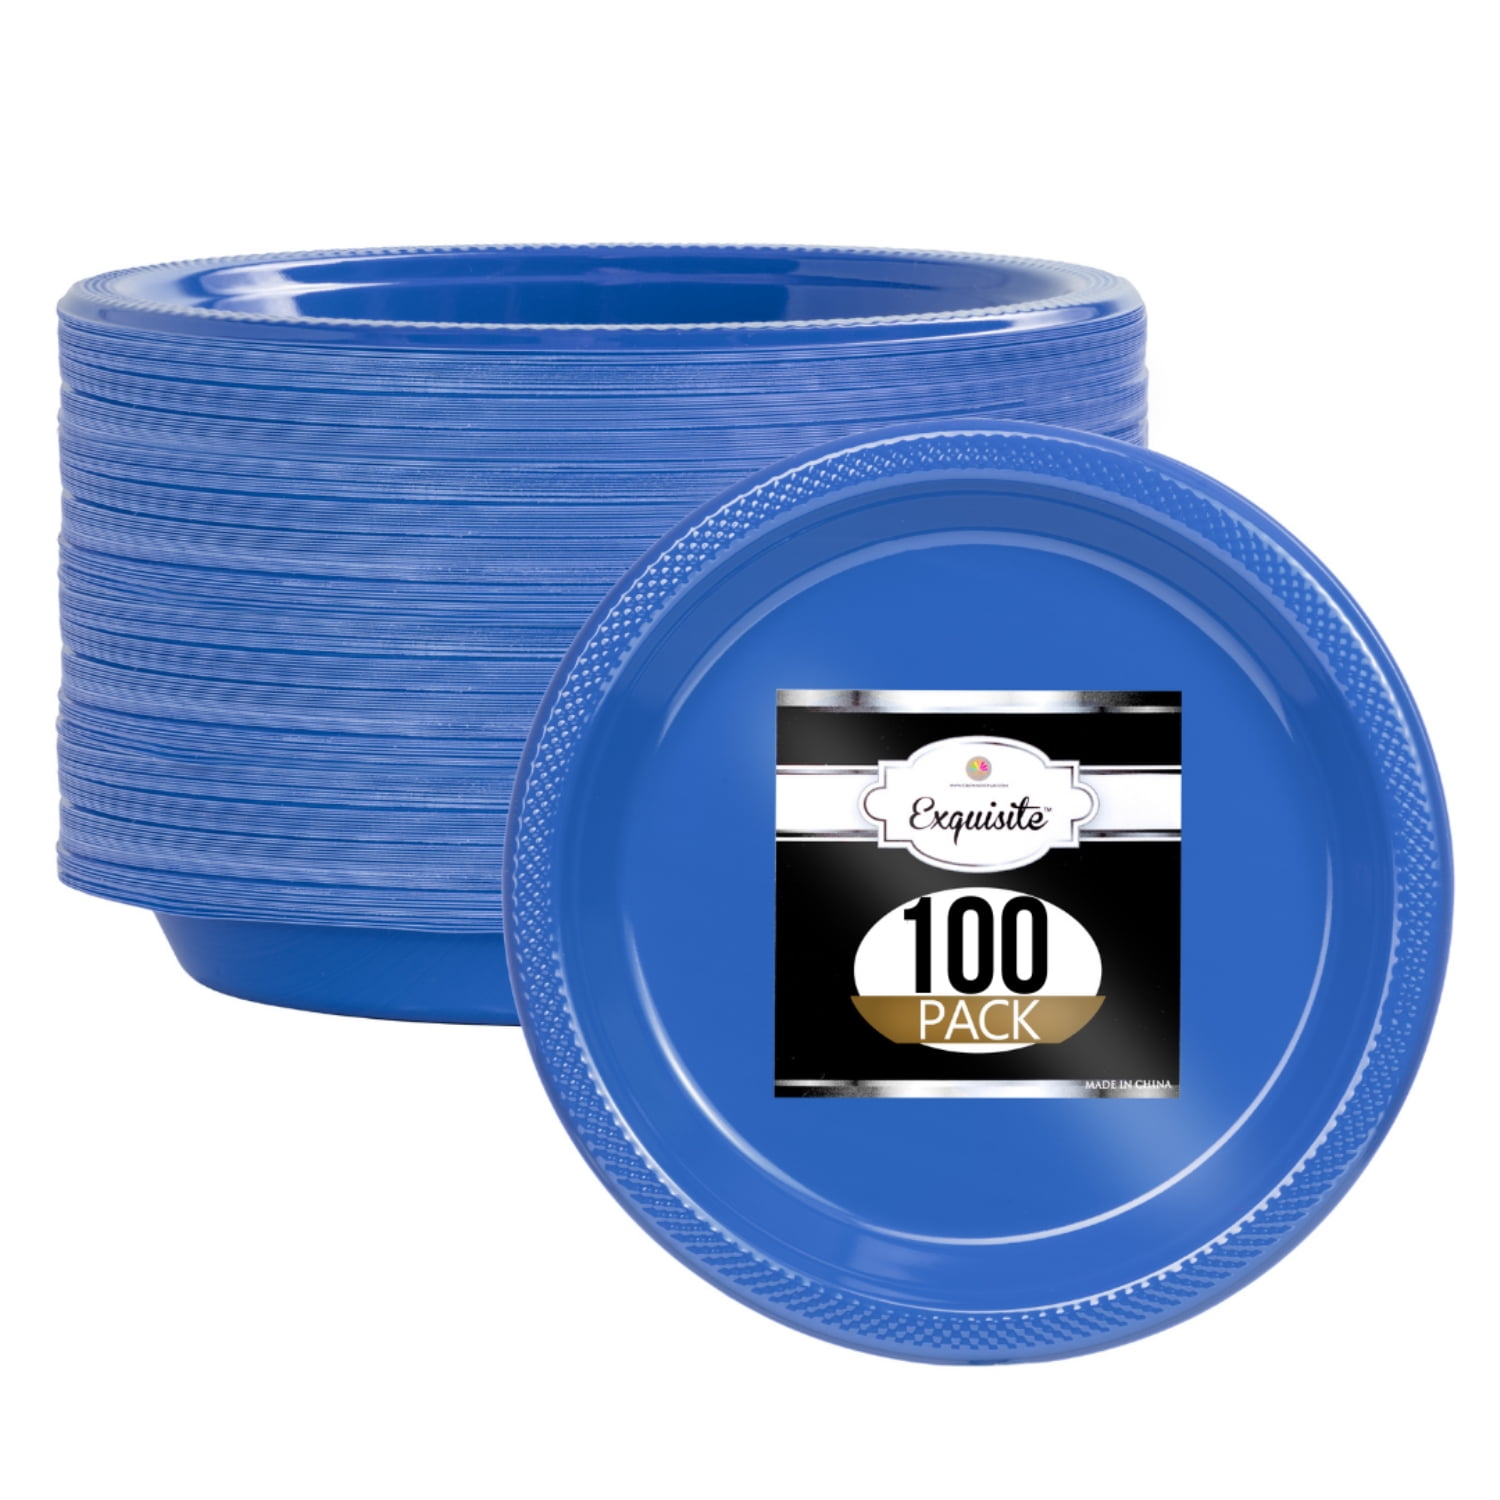 Club Pack of 240 Blue Small Round Premium Pastel Disposable Party Bowls 12  oz. - Bed Bath & Beyond - 16607375